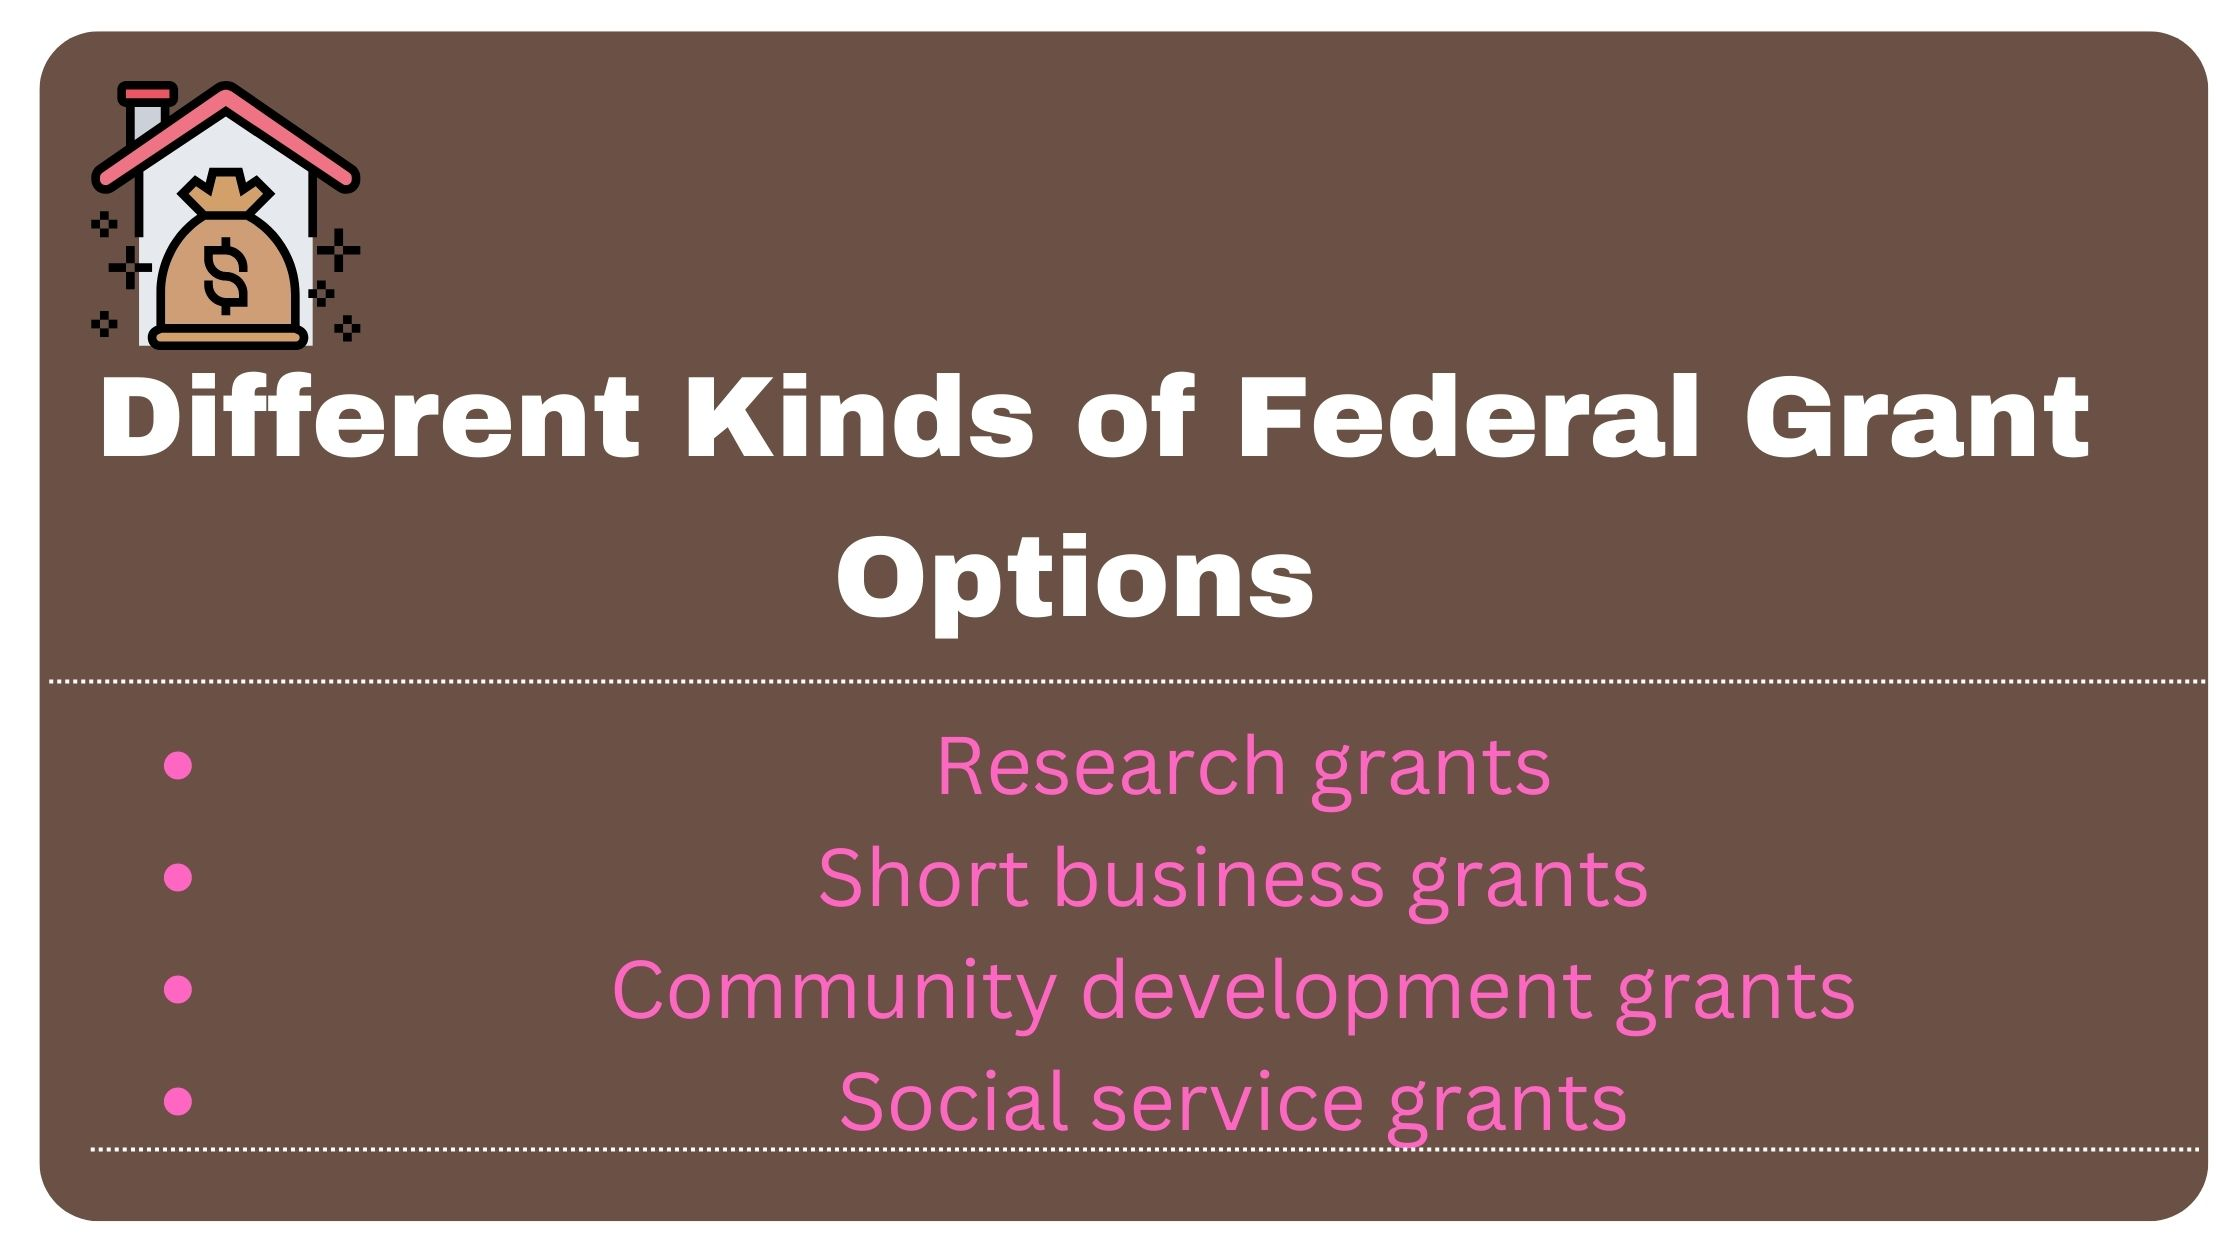 Different Kinds of Federal Grant Options